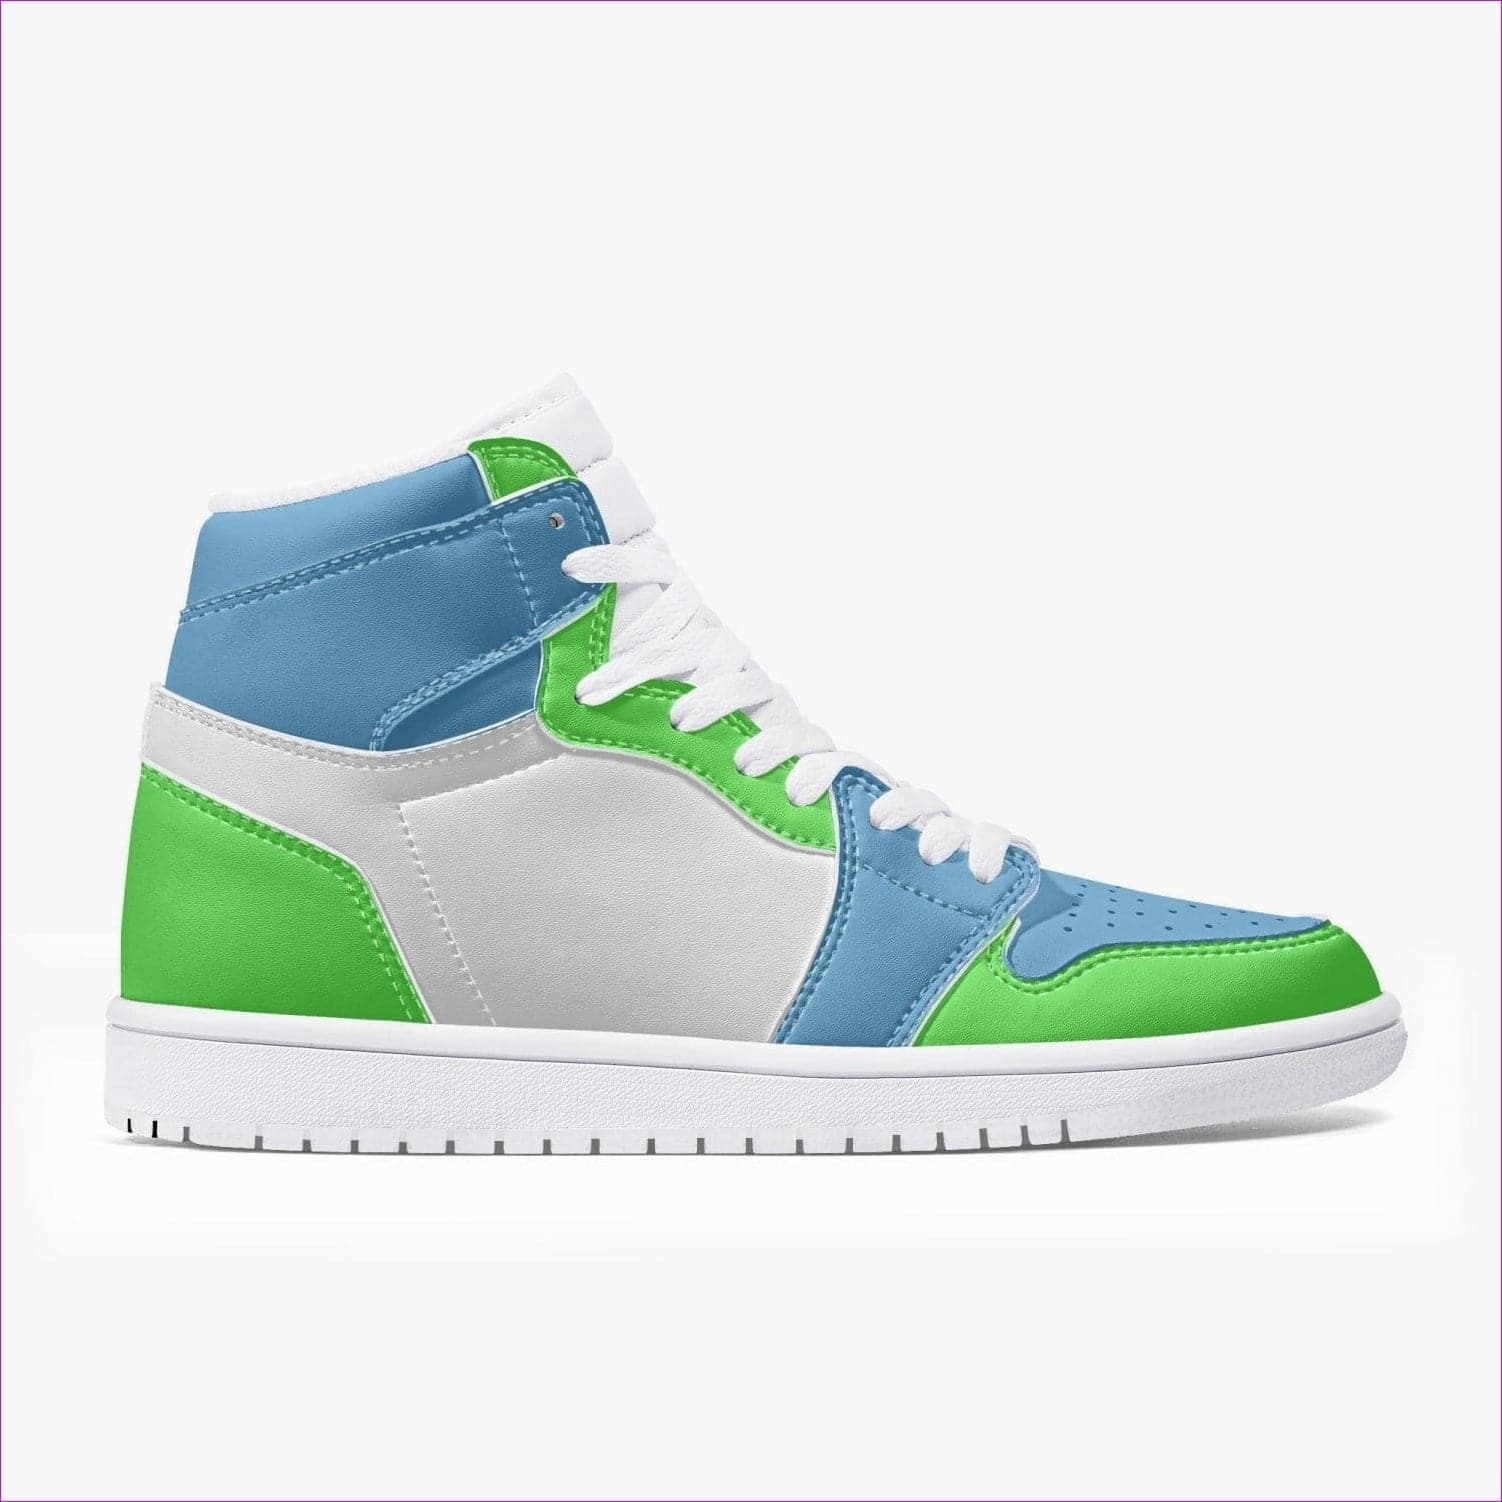 Kiwi Blue High-Top Leather Sneakers - unisex shoes at TFC&H Co.